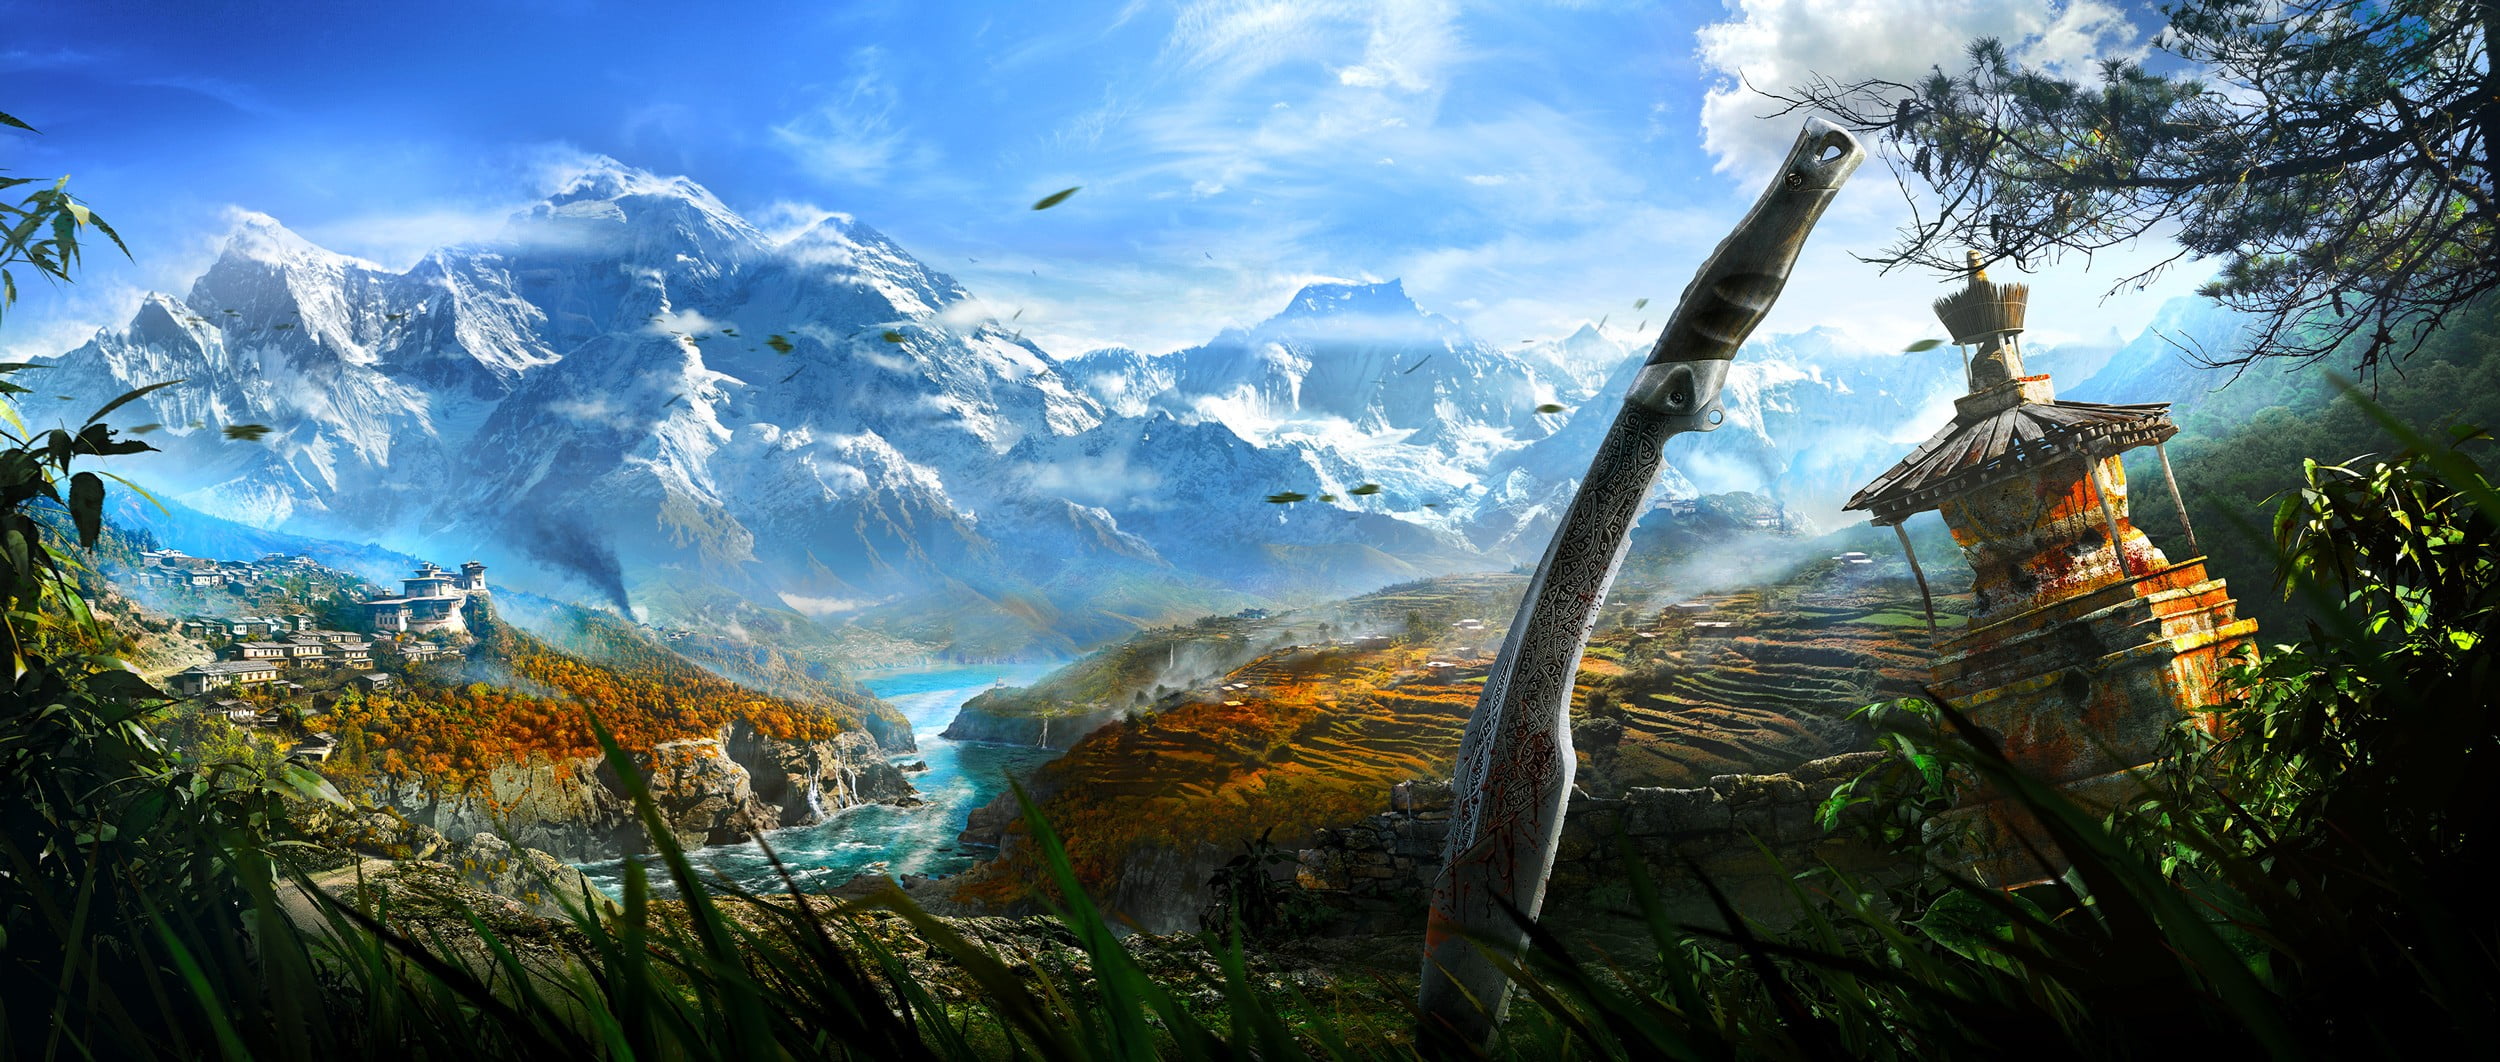 machete on ground with mountain in the background digital wallpaper, video games, Far Cry 4, landscape